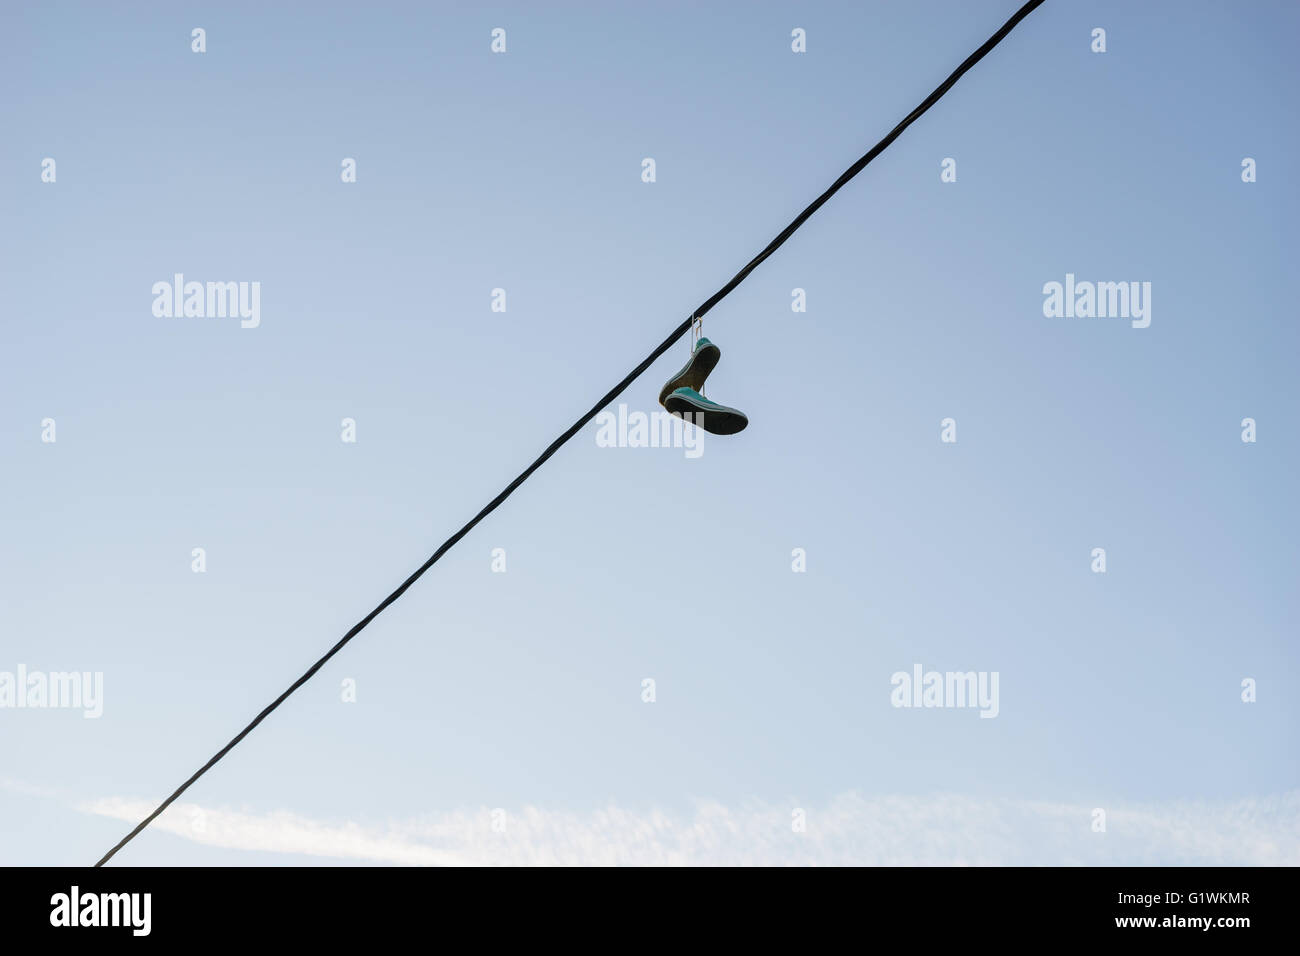 Old pair of sneakers dangling on power line cable against blue sky, life change concept Stock Photo